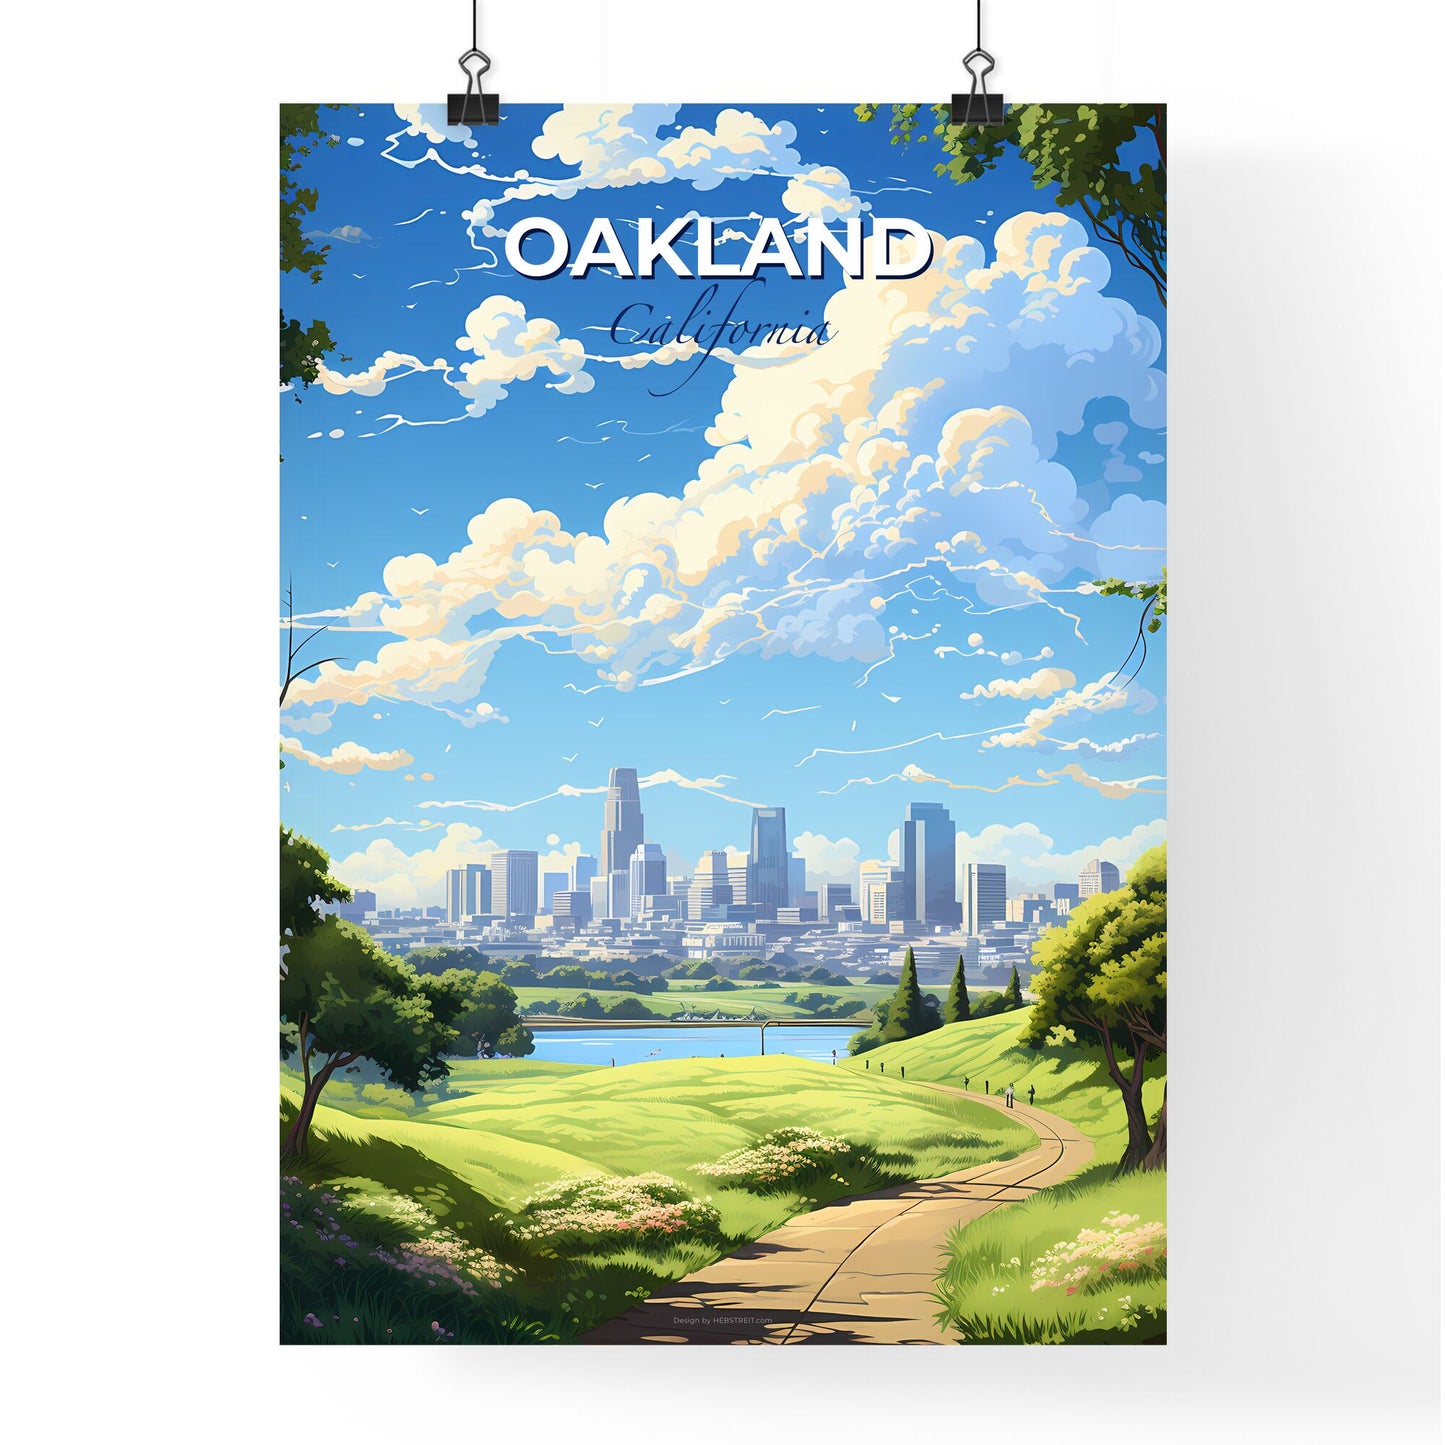 Oakland California Skyline - A Landscape Of A City With A River And Trees - Customizable Travel Gift Default Title